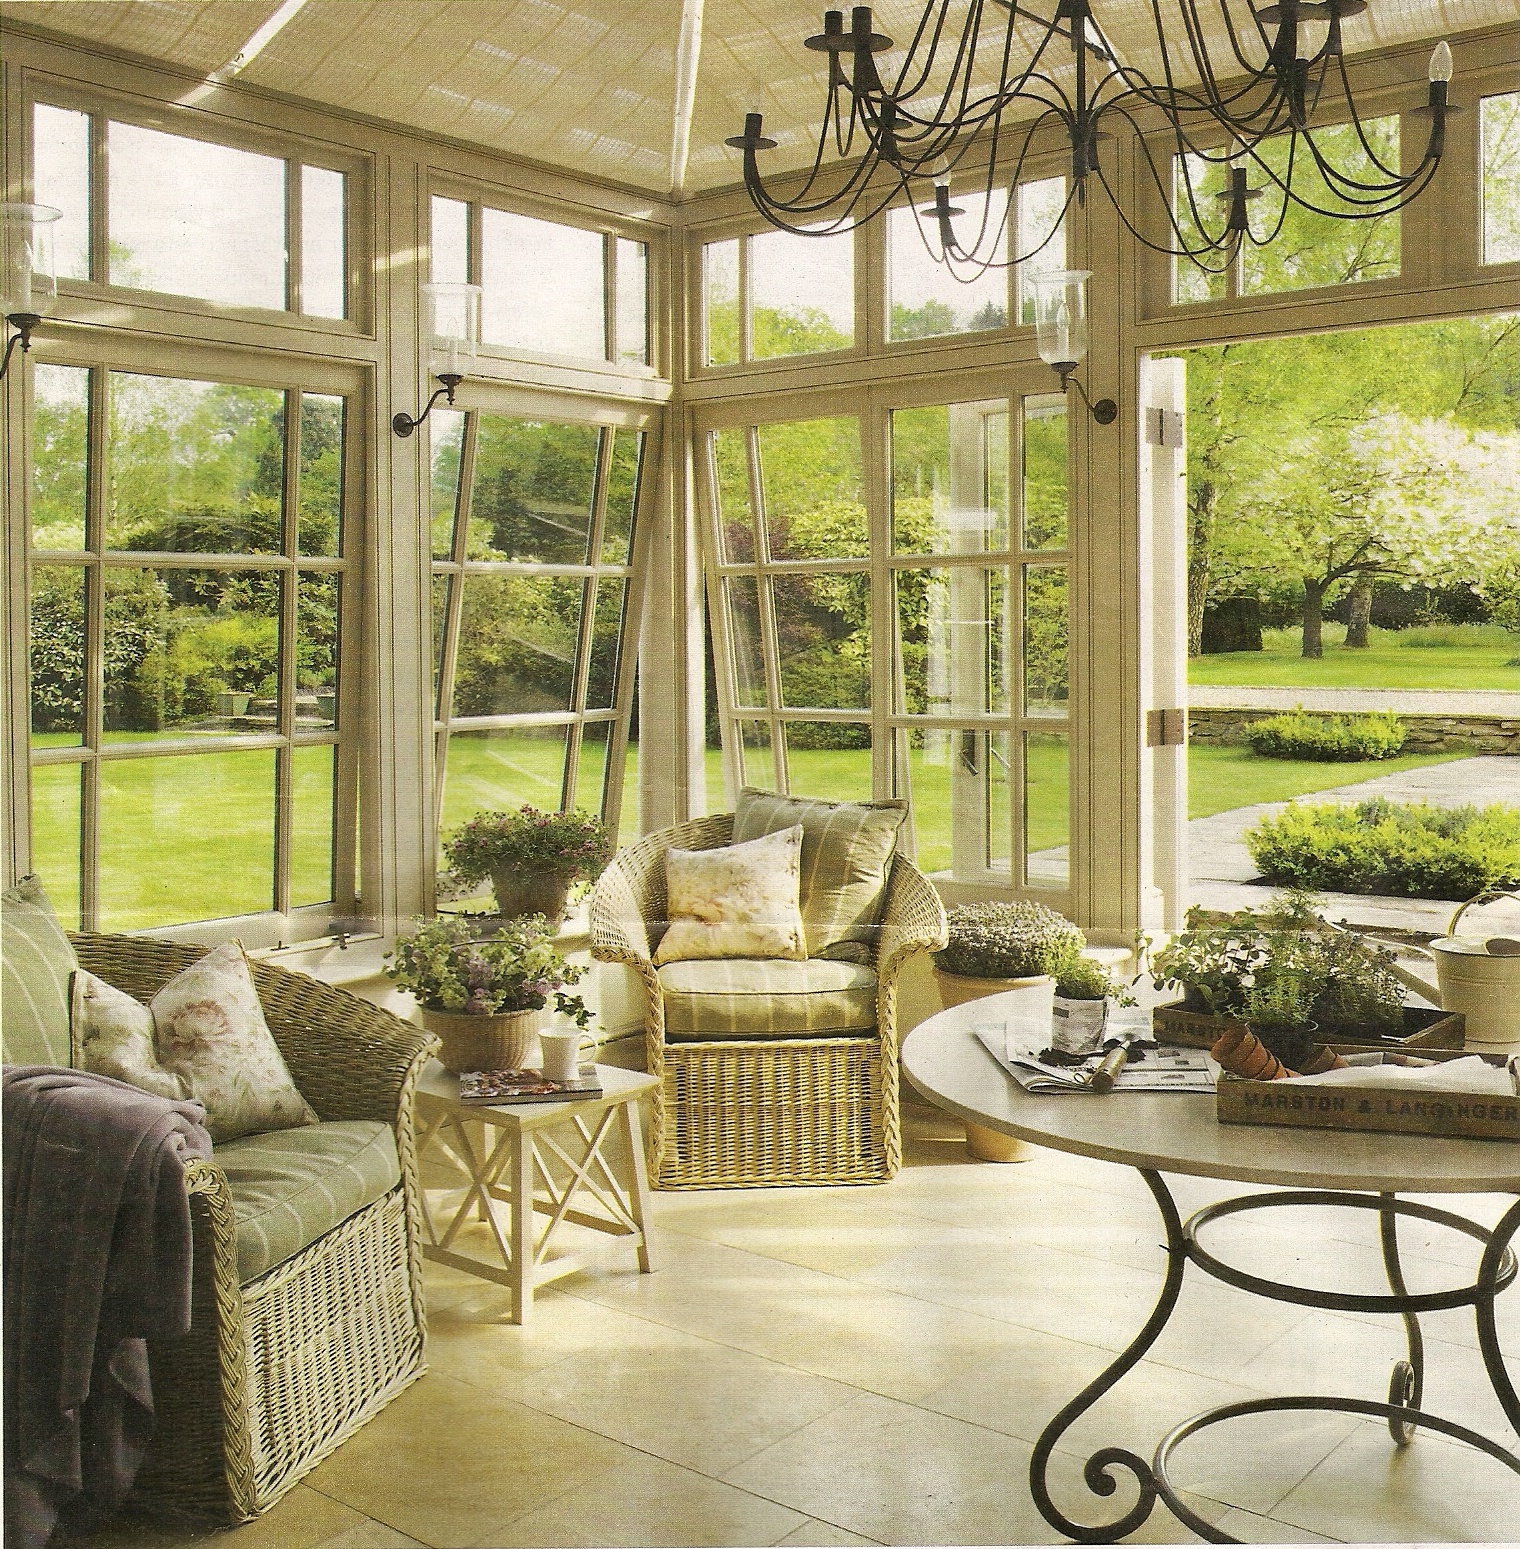 Image of: Sunroom Design Pictures